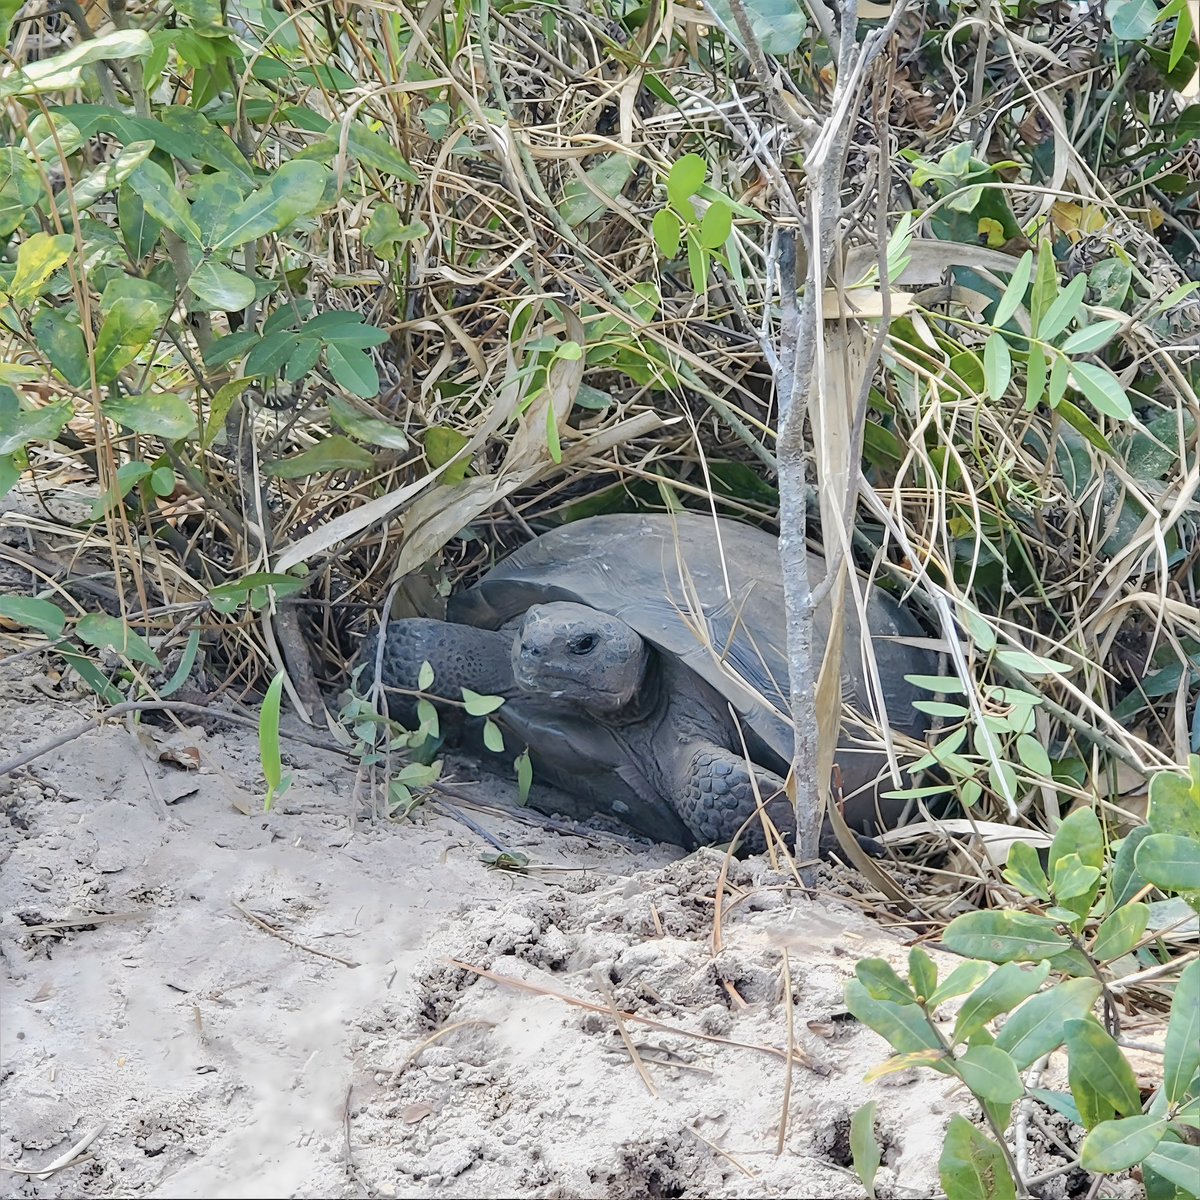 This gopher tortoise was spotted over by the Natural Lands pavilion soaking up some sun! Gopher tortoise burrows are known to go as deep as nine feet deep to shelter from Florida’s extreme temperatures

#teachingtuesday